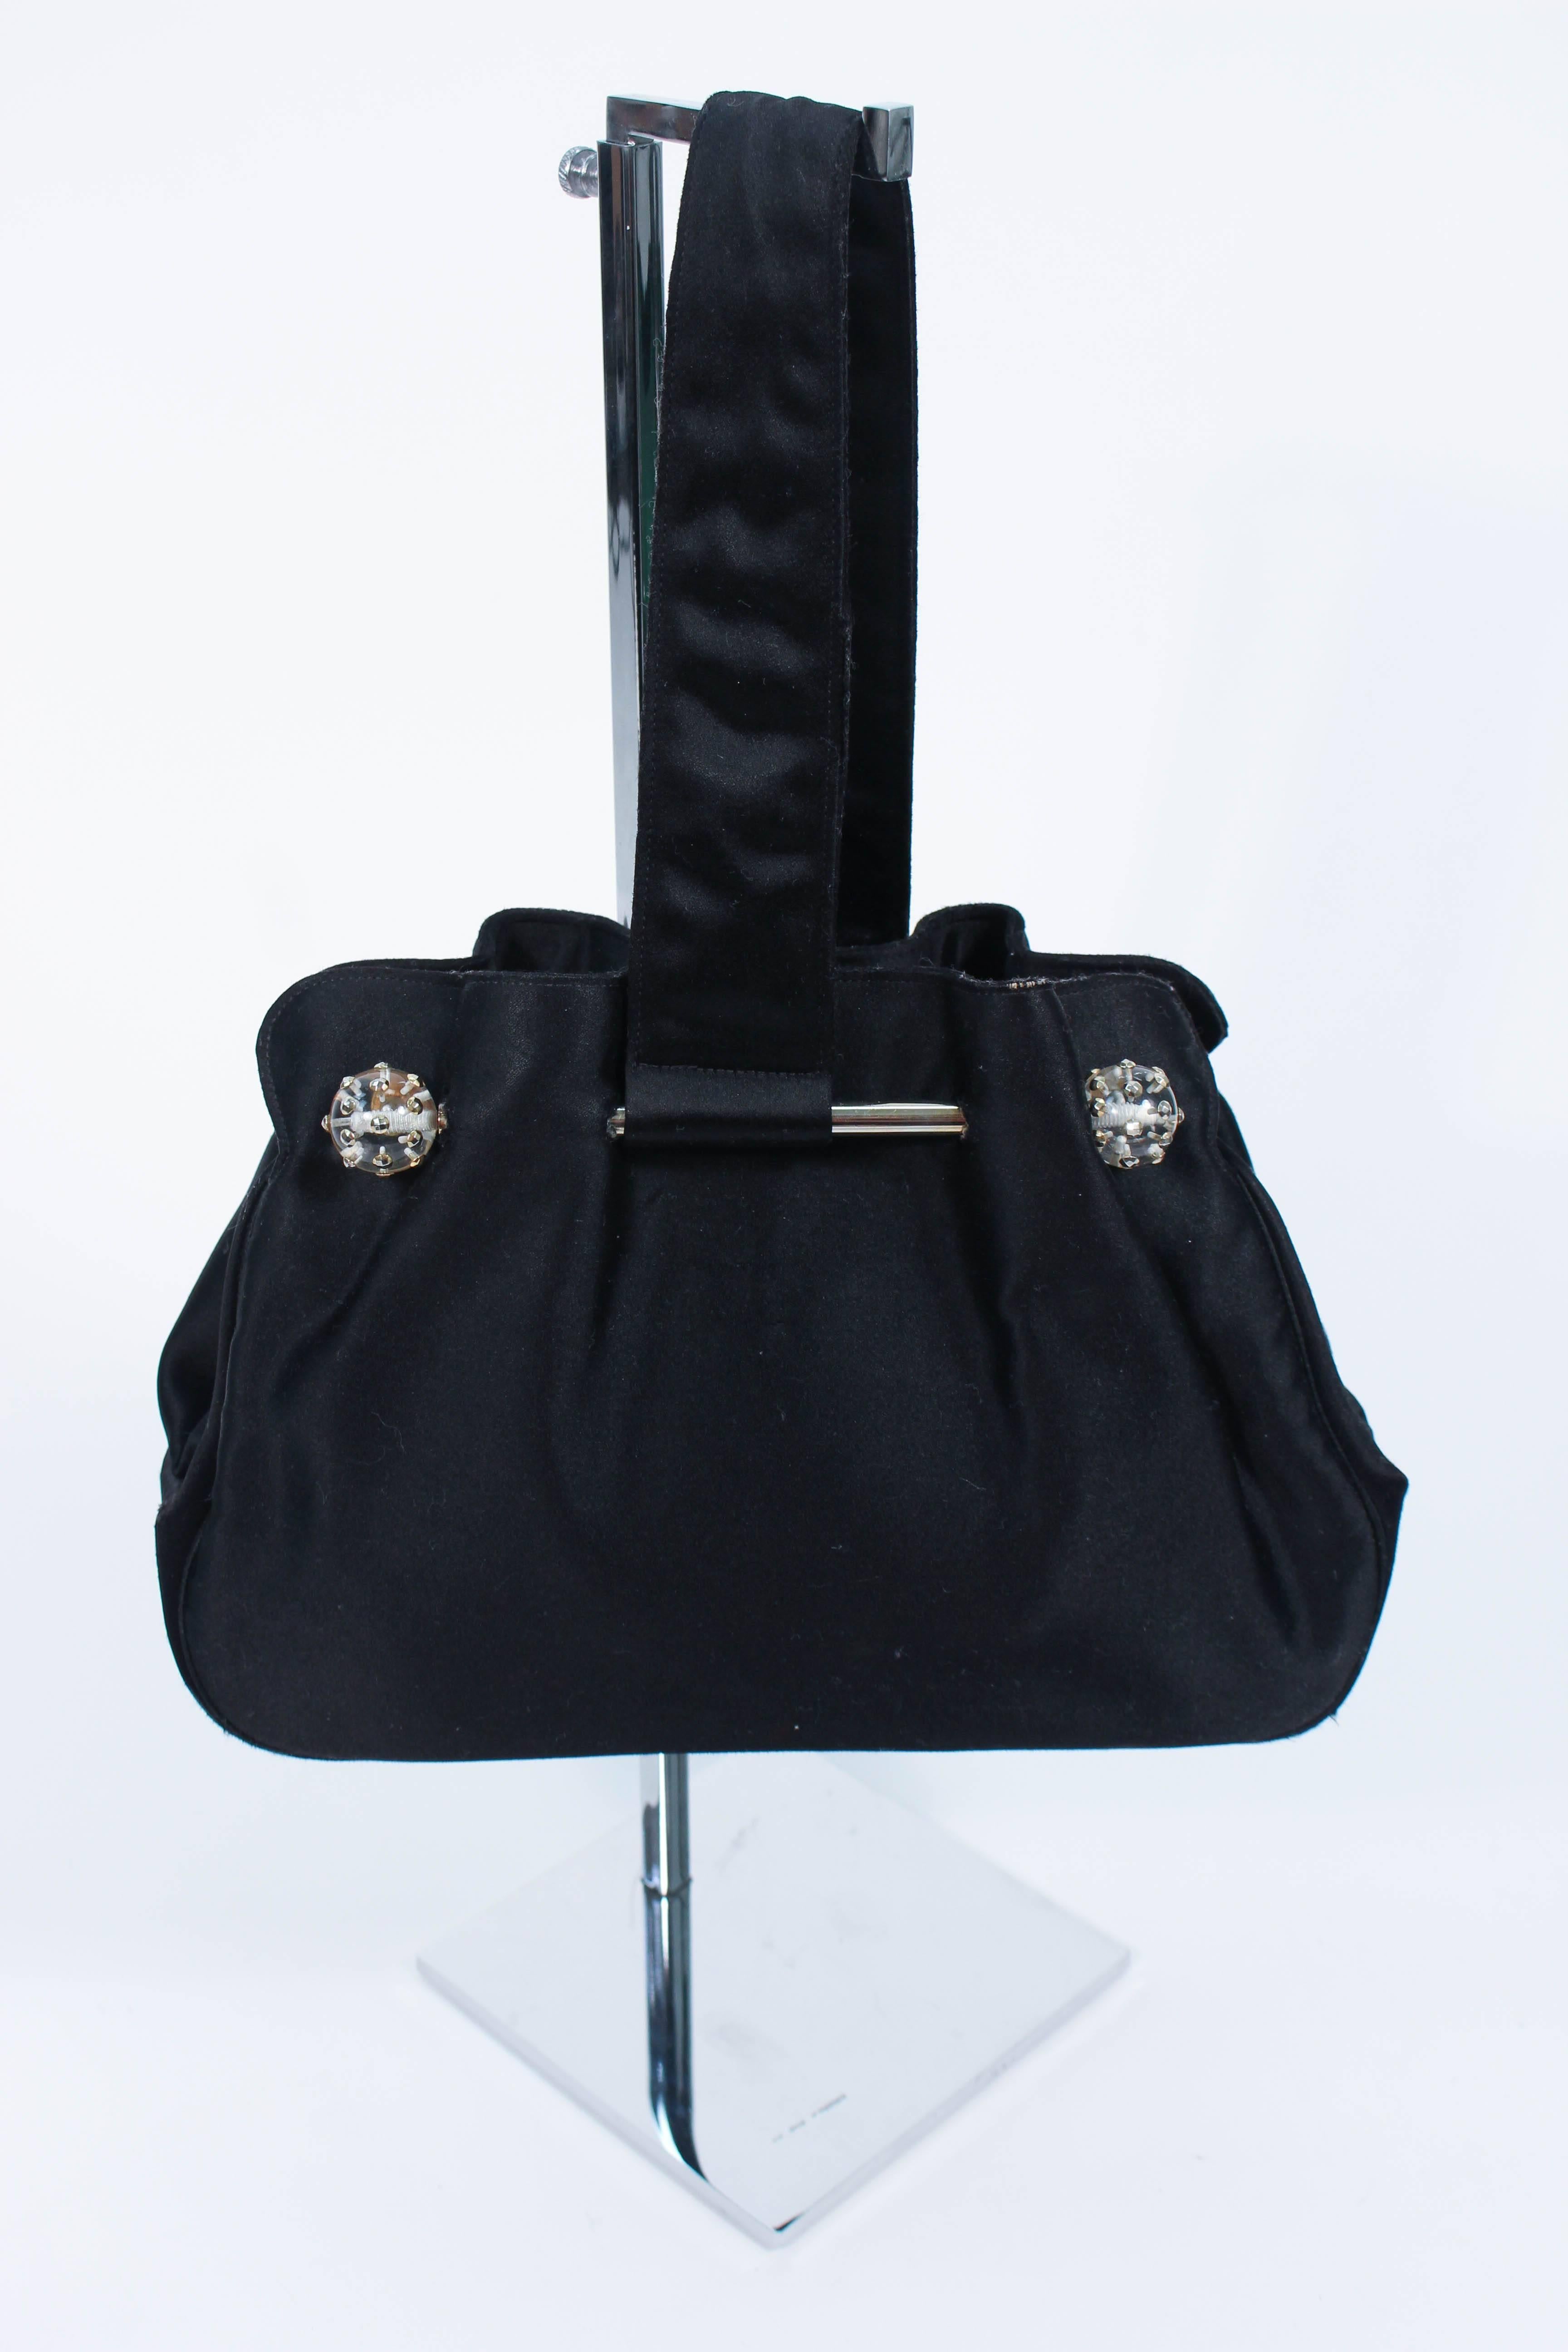 This vijntage 1950's purse is composed of black silk satin. Features lucite ball accents with inset rhinestones. There is an interior compartment with silk lining. In excellent vintage condition, comes with mirror.

**Please cross-reference